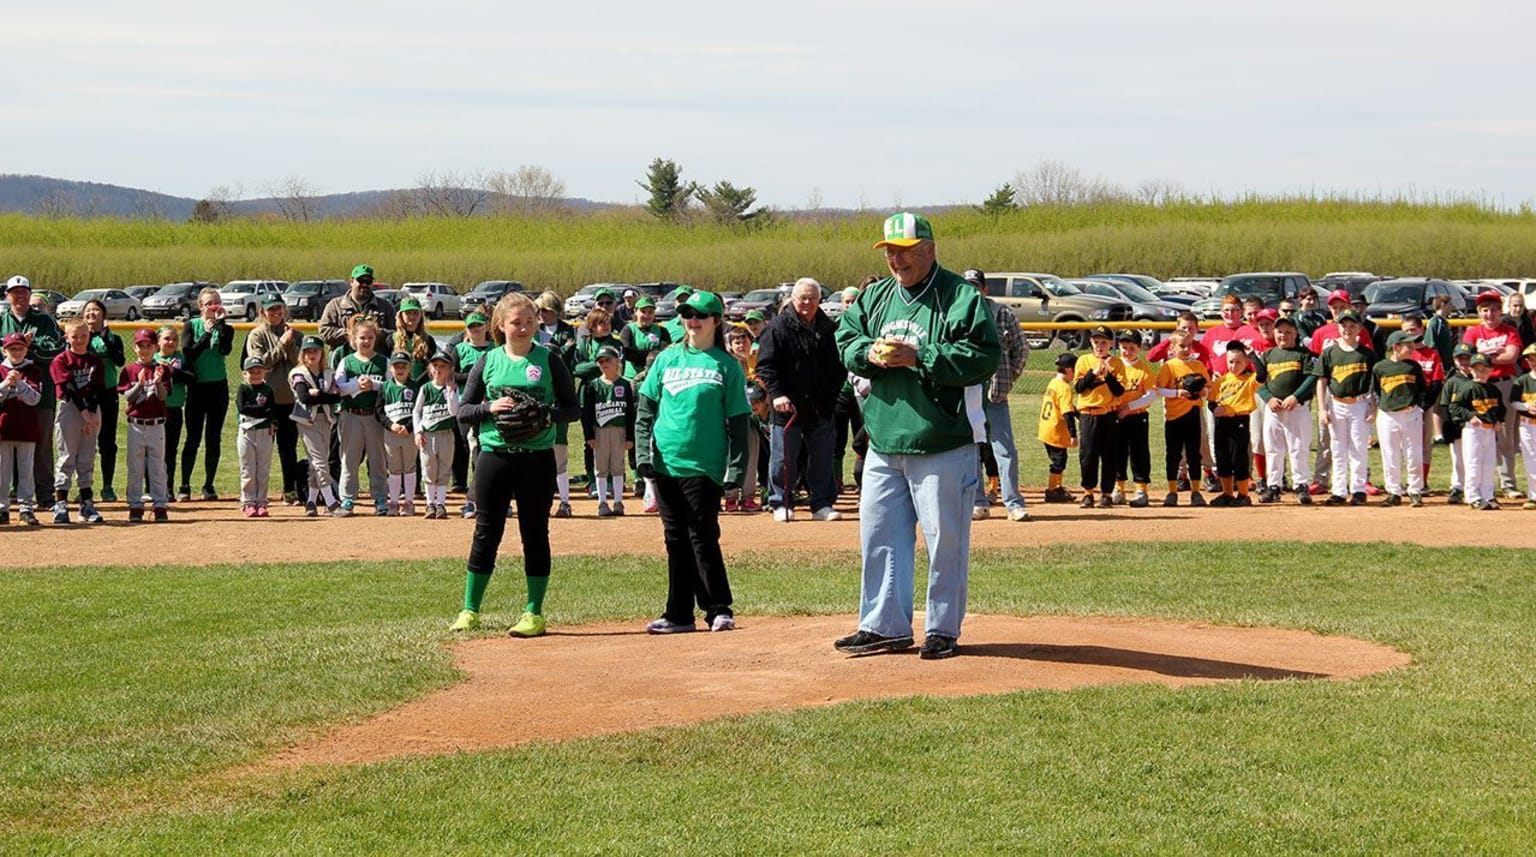 10 Tips for Organizing Opening Day Little League